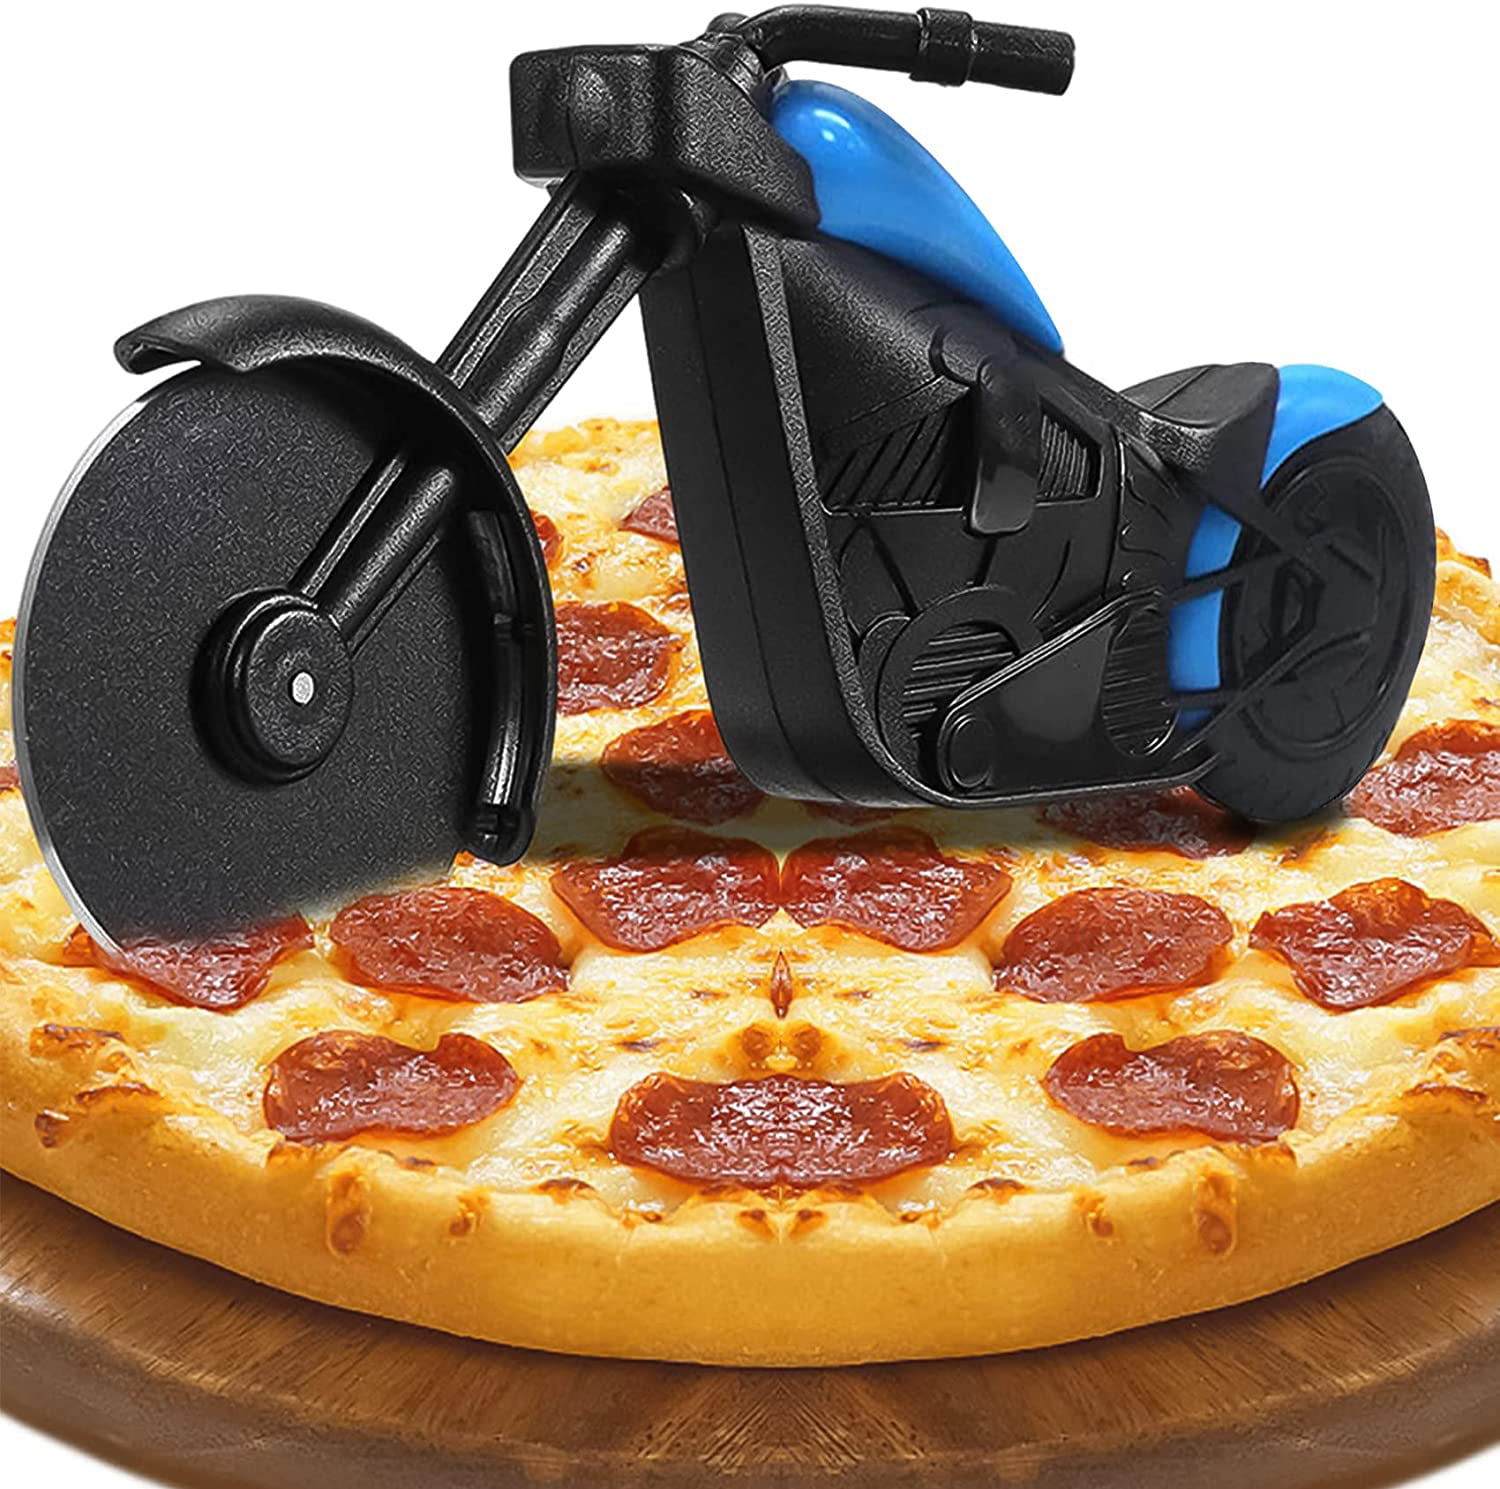 Pizza Cutter Motorcycle, Funny Pizza Cutter, Pizza Scooter Motorcycle,  Stainless Steel Plastic Pizza Roller, Funny Kitchen Aids, Motorcycle Gifts  for Men, for Christmas, Birthday Gifts (Blue) 